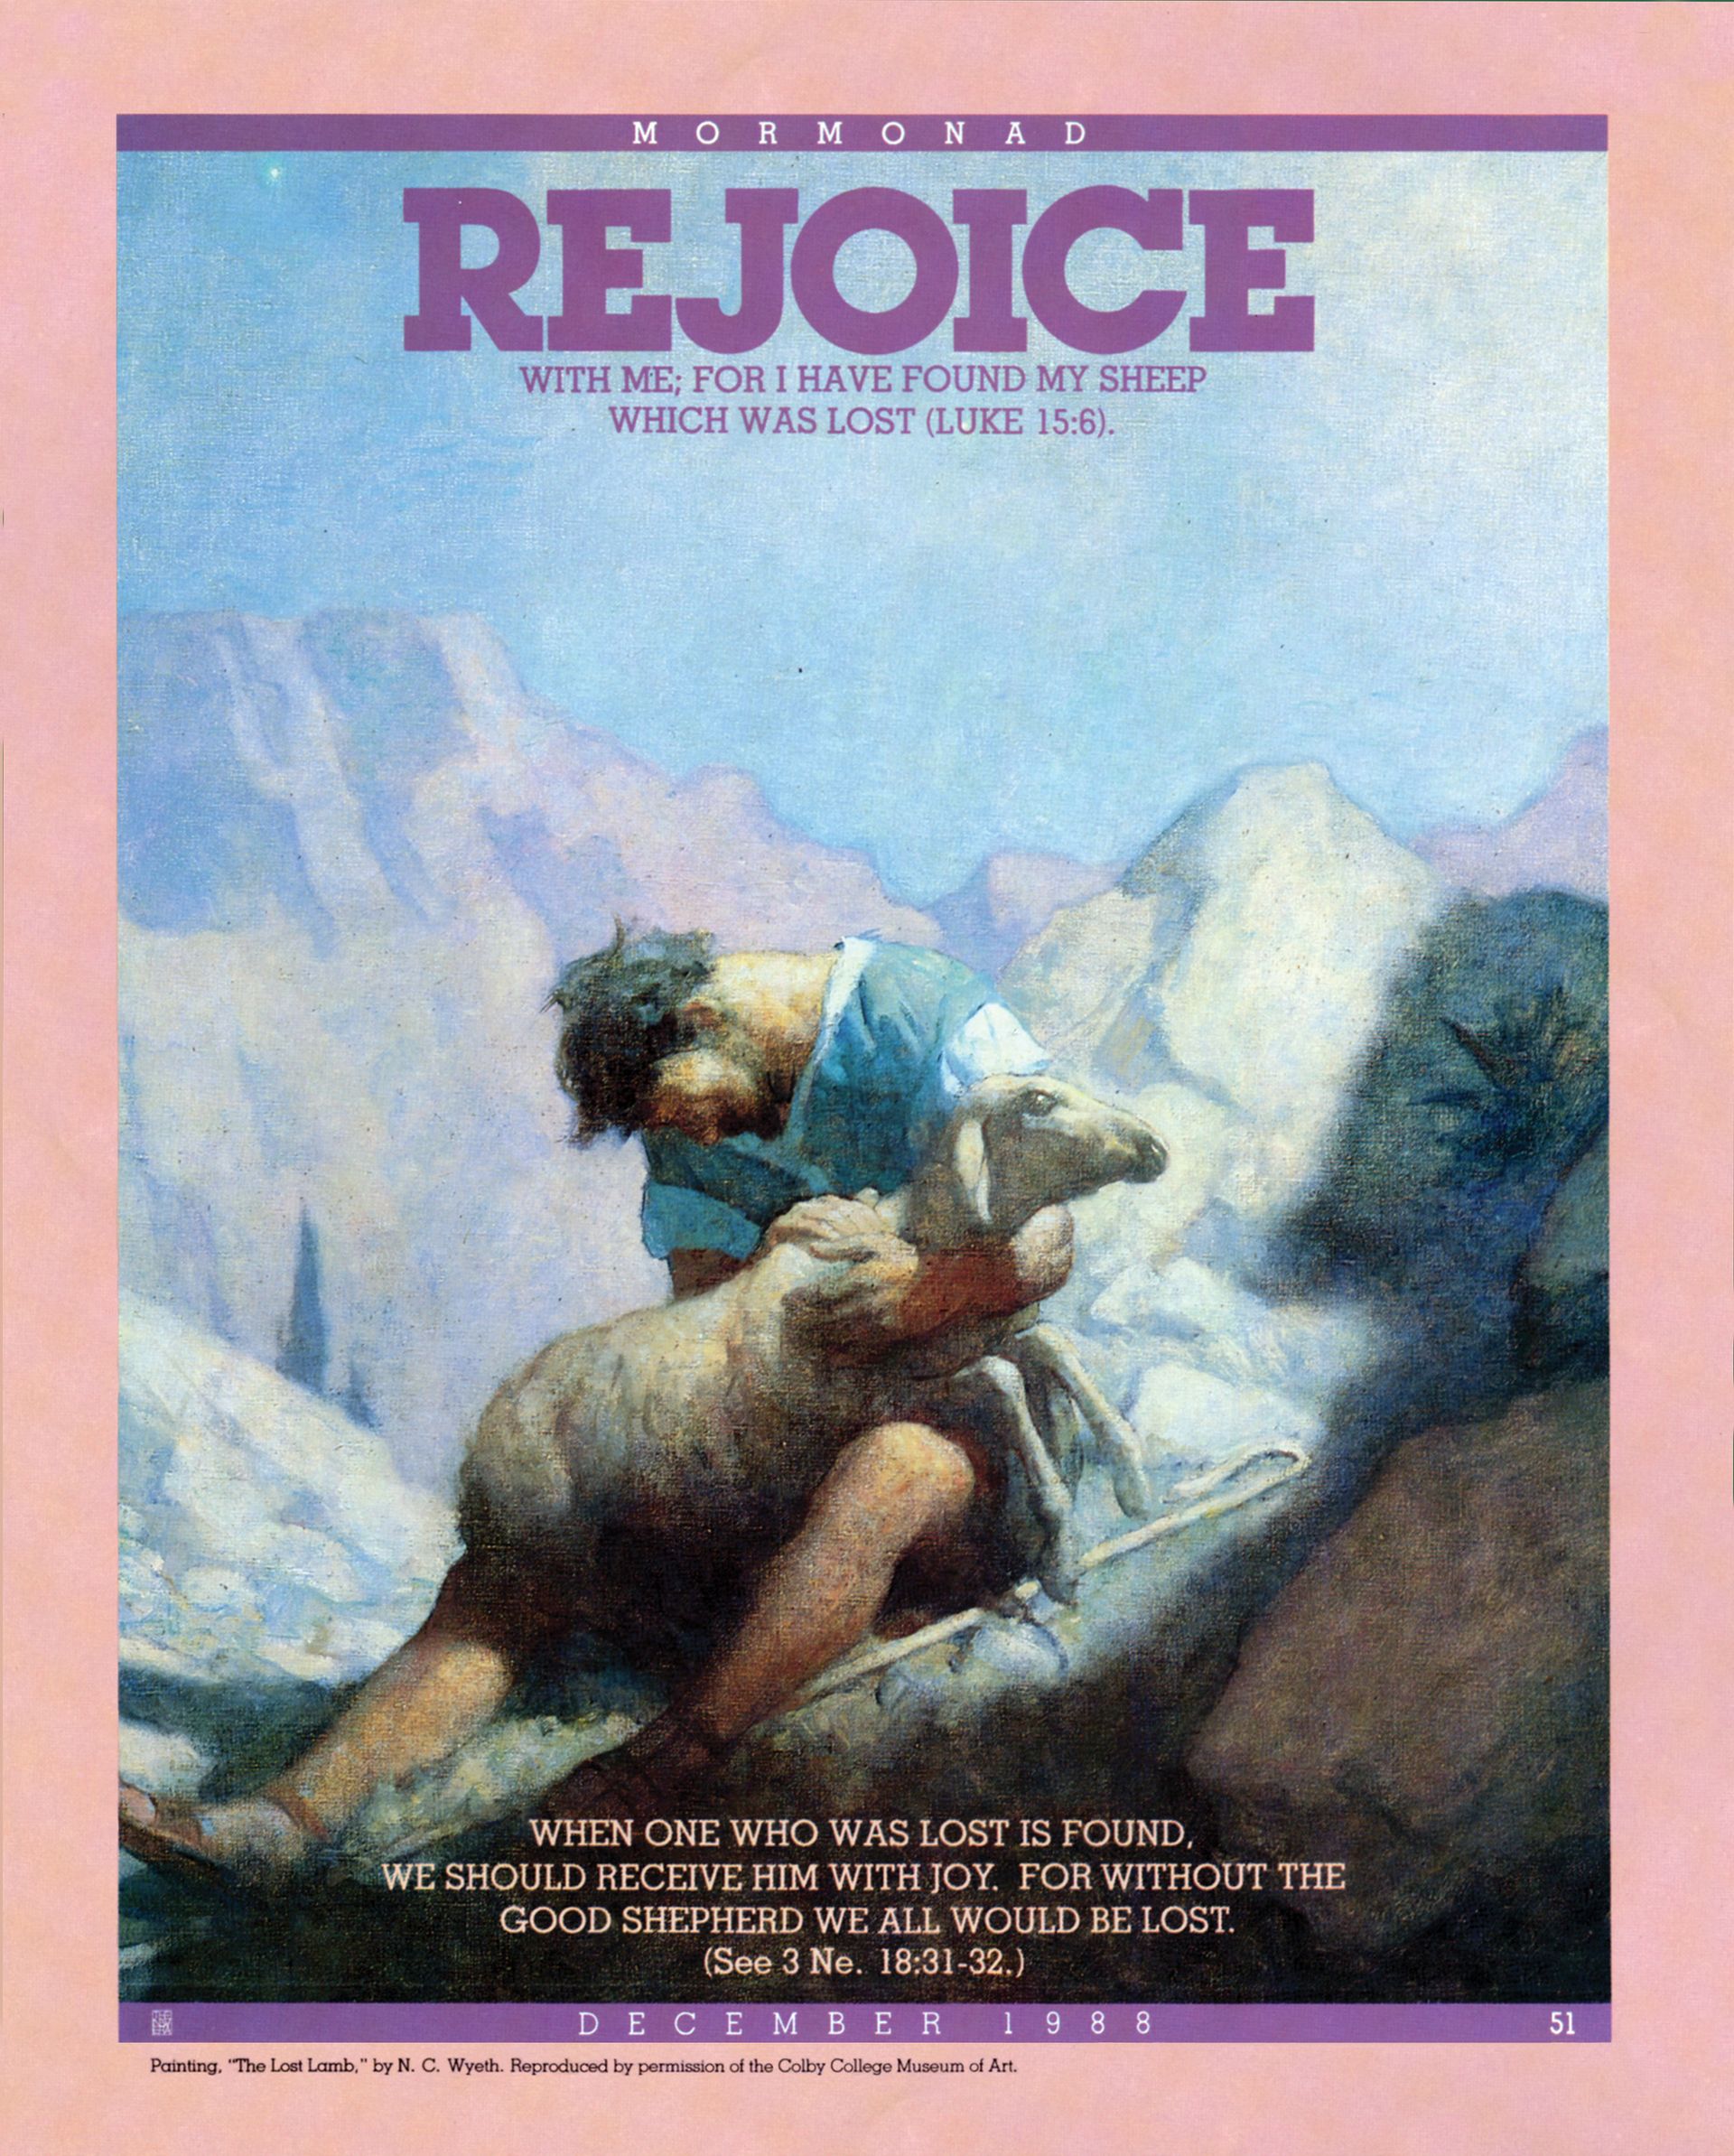 Rejoice with Me; For I Have Found My Sheep Which Was Lost (Luke 15:6). When one who was lost is found, we should receive him with joy. For without the Good Shepherd we all would be lost. (See 3 Ne. 18:31–32.) Dec. 1988 © undefined ipCode 1.